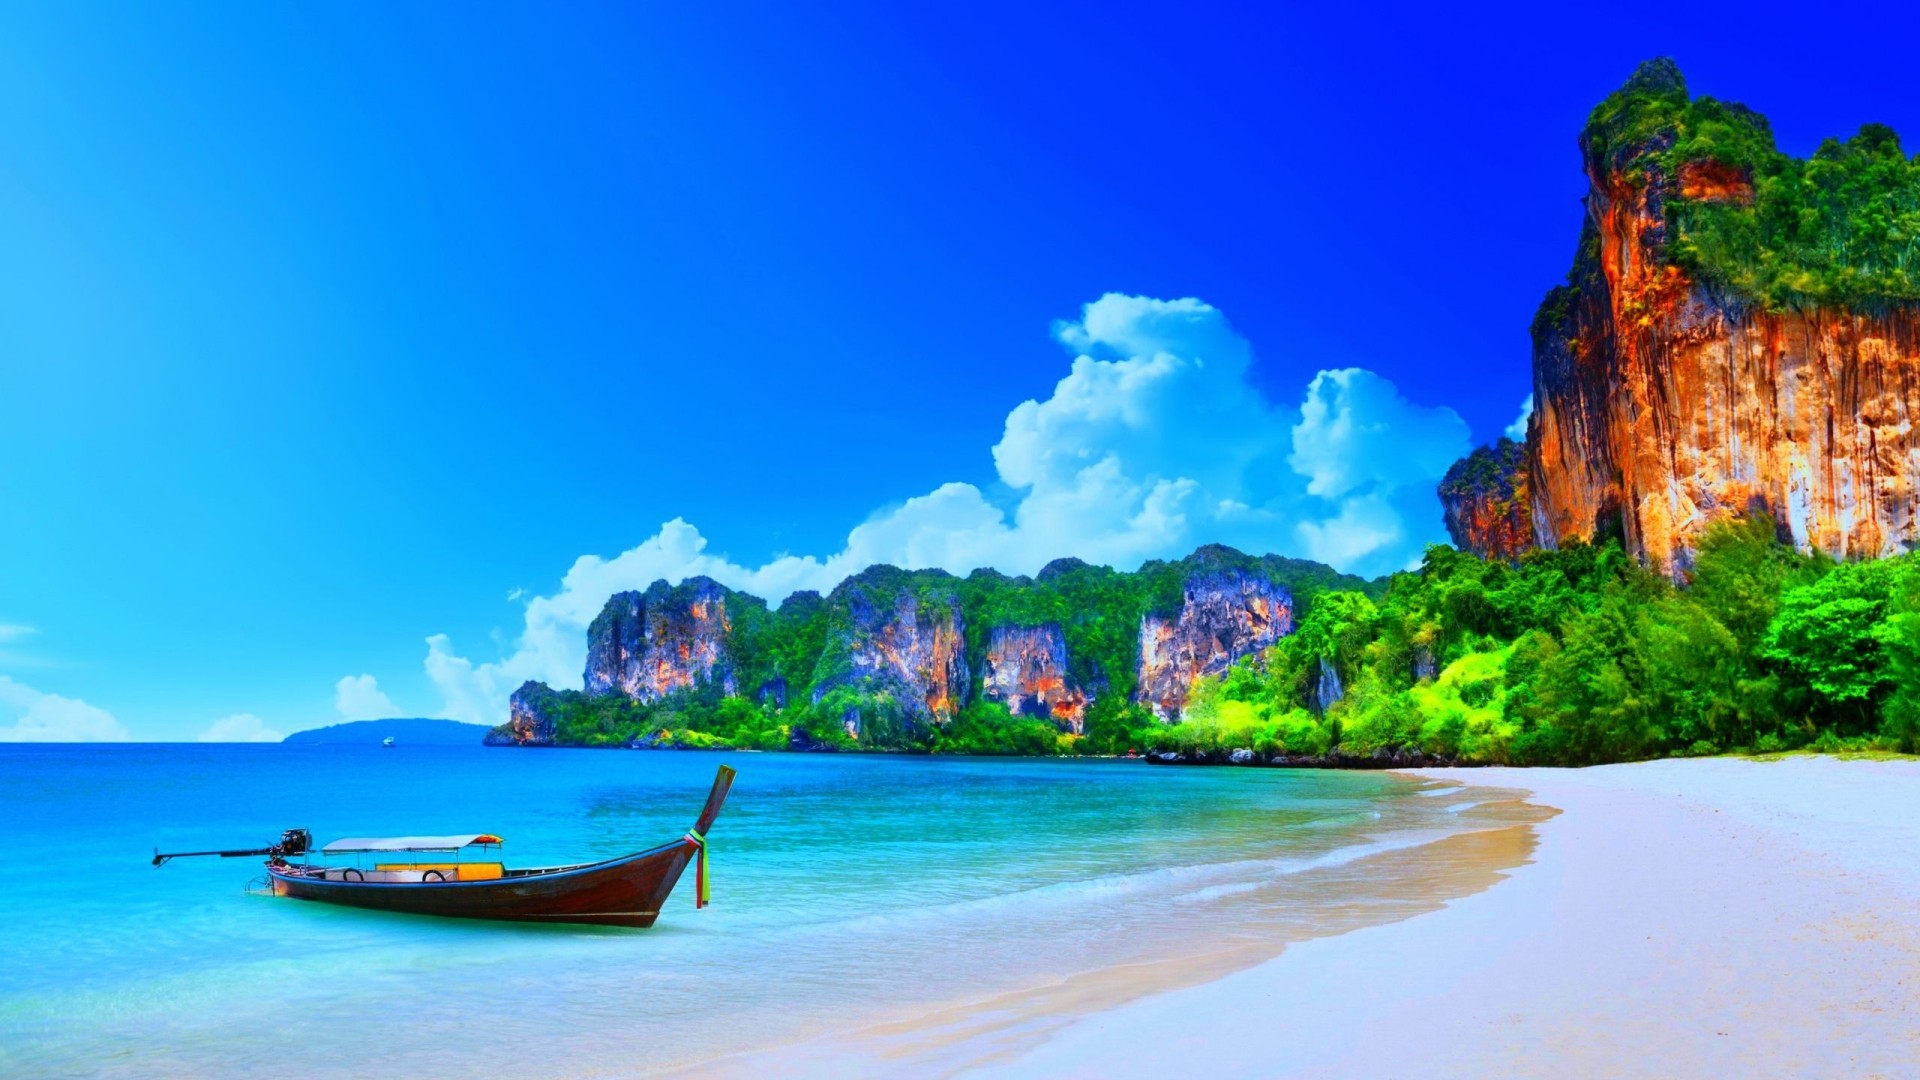 thailand beach background wallpapers   HD Wallpapers